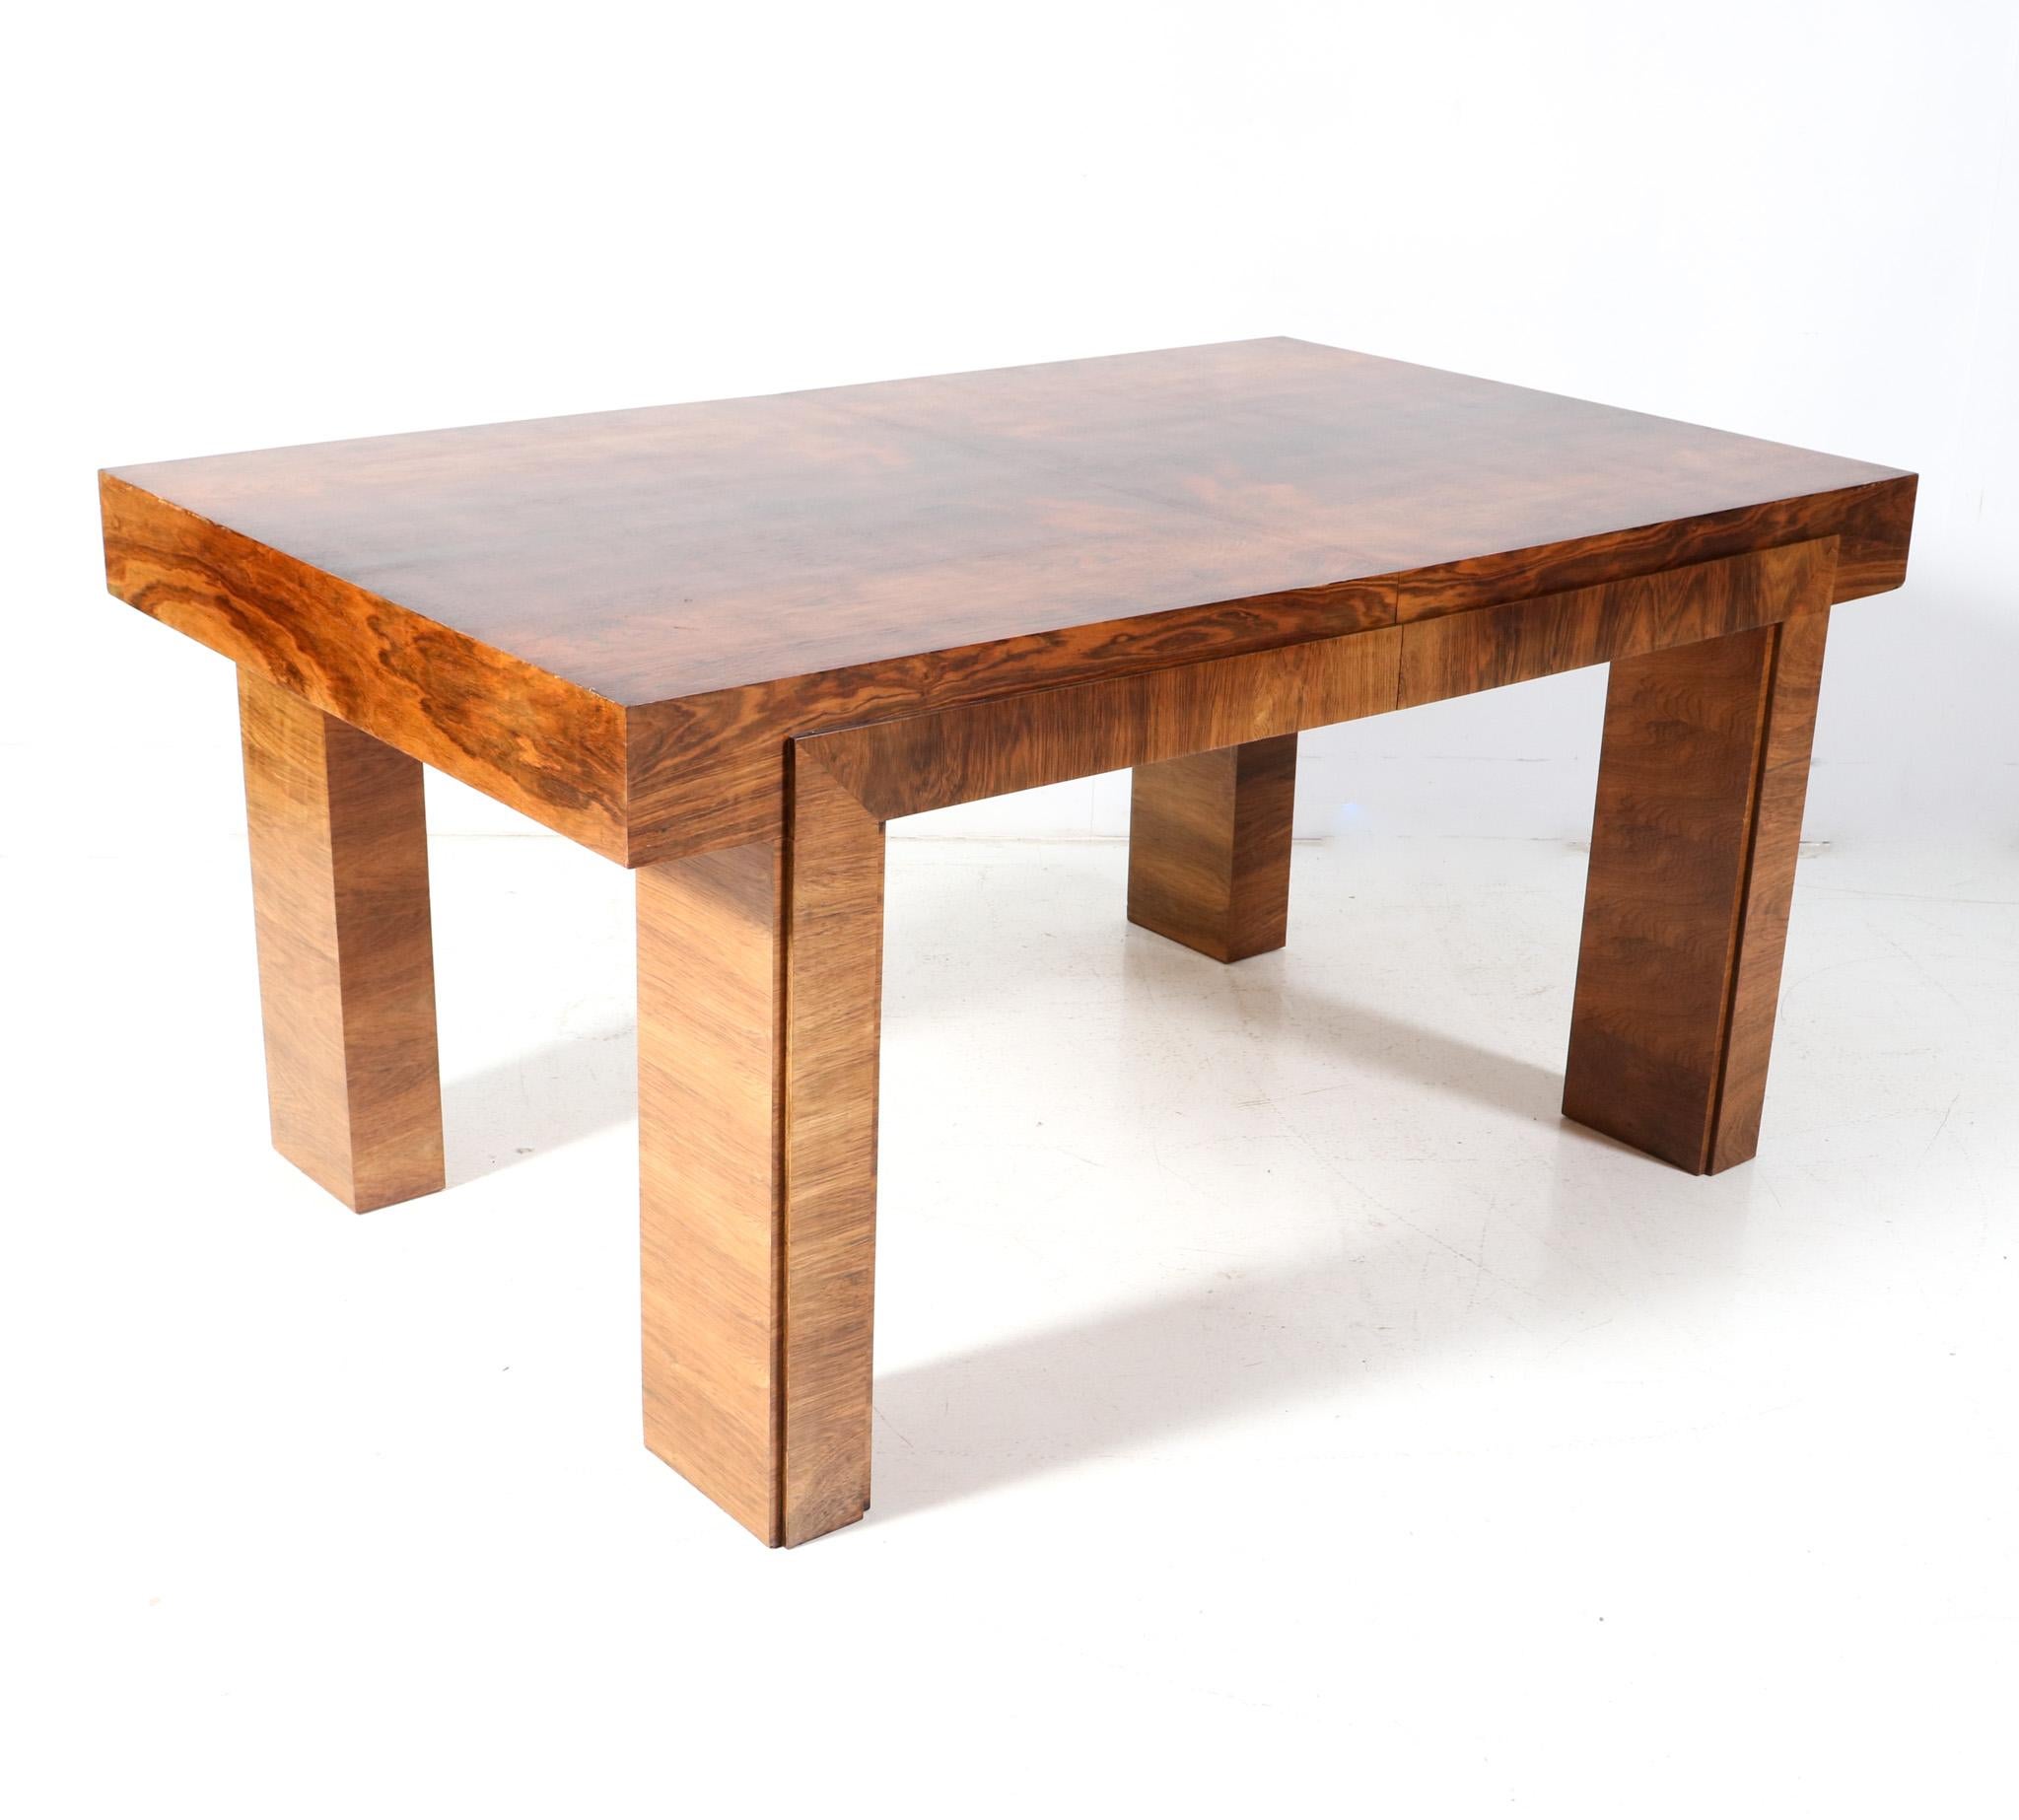  French Art Deco Walnut Table or Writing Table, 1930s For Sale 3